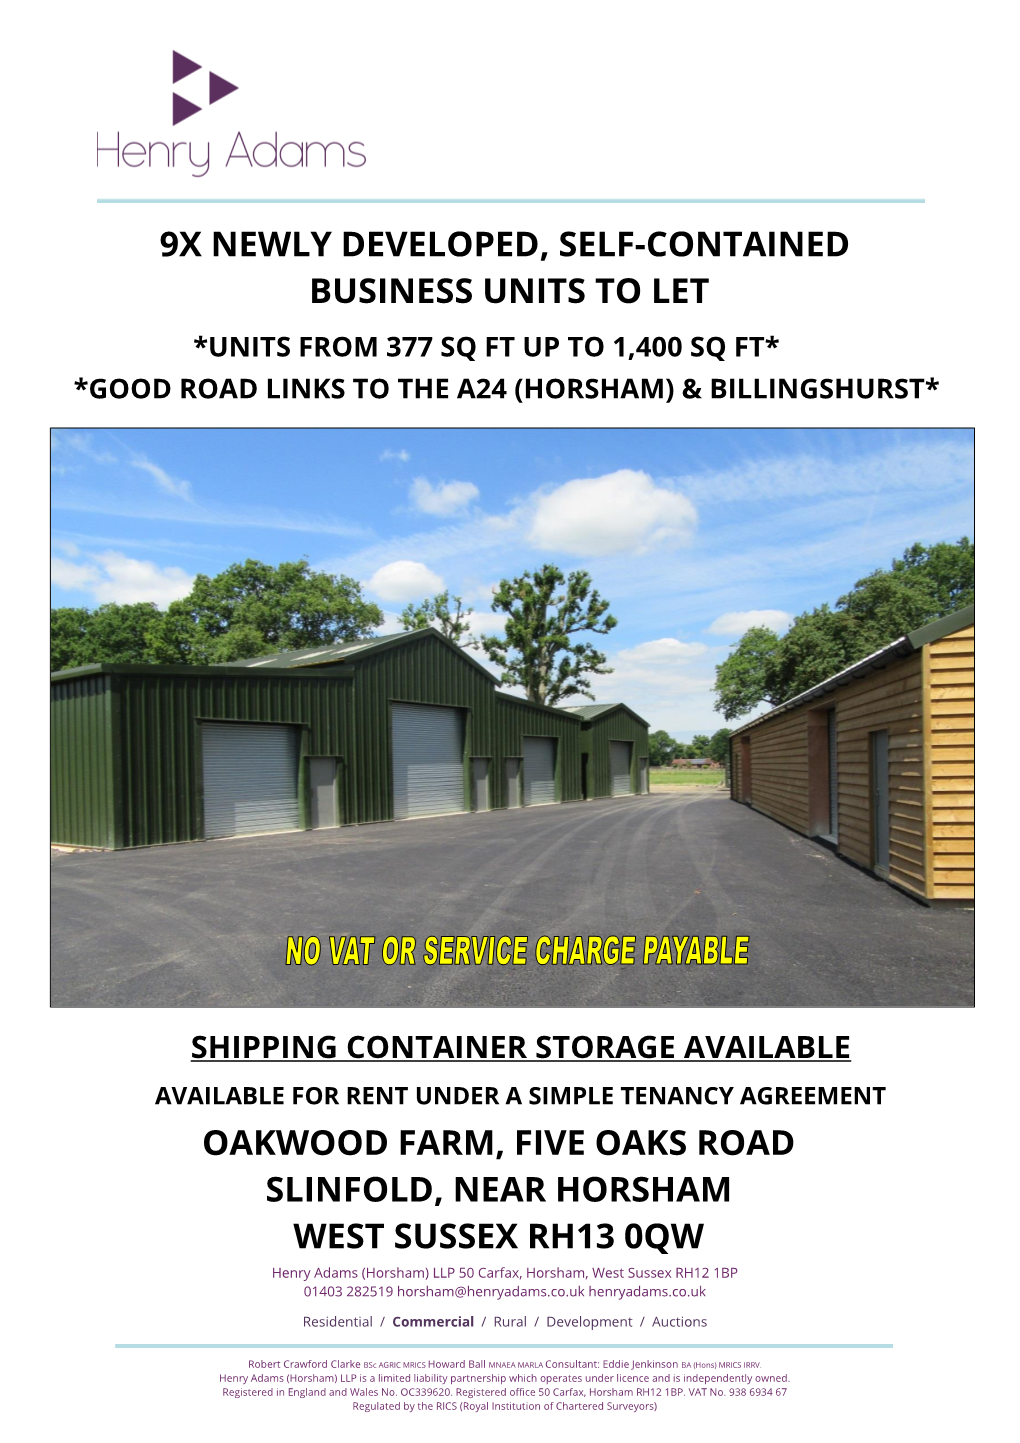 9X Newly Developed, Self-Contained Business Units to Let Oakwood Farm, Five Oaks Road Slinfold, Near Horsham West Sussex Rh13